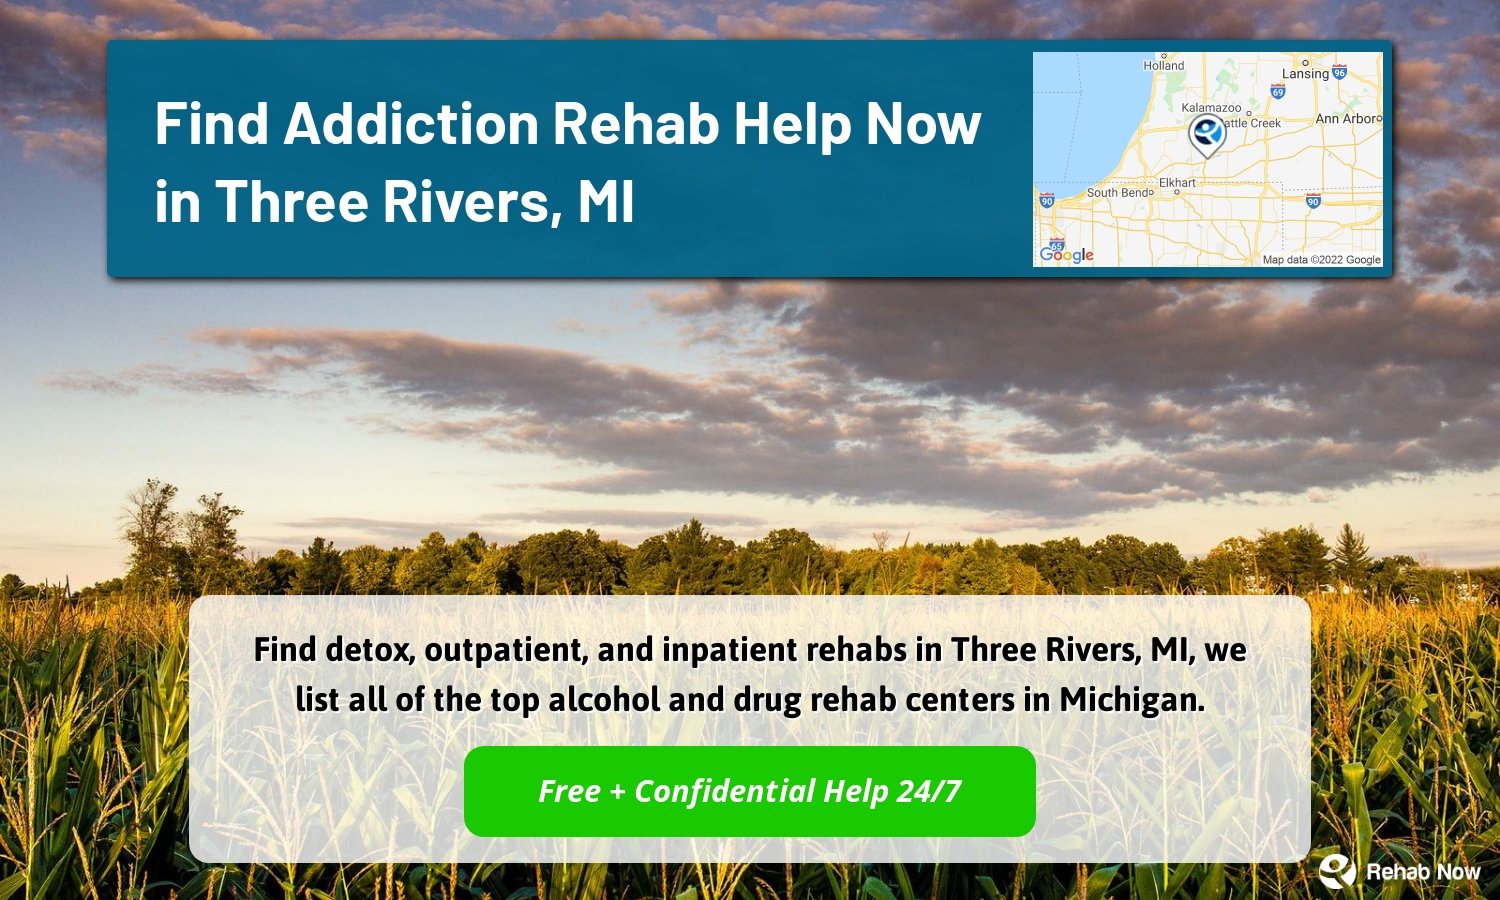 Find detox, outpatient, and inpatient rehabs in Three Rivers, MI, we list all of the top alcohol and drug rehab centers in Michigan.